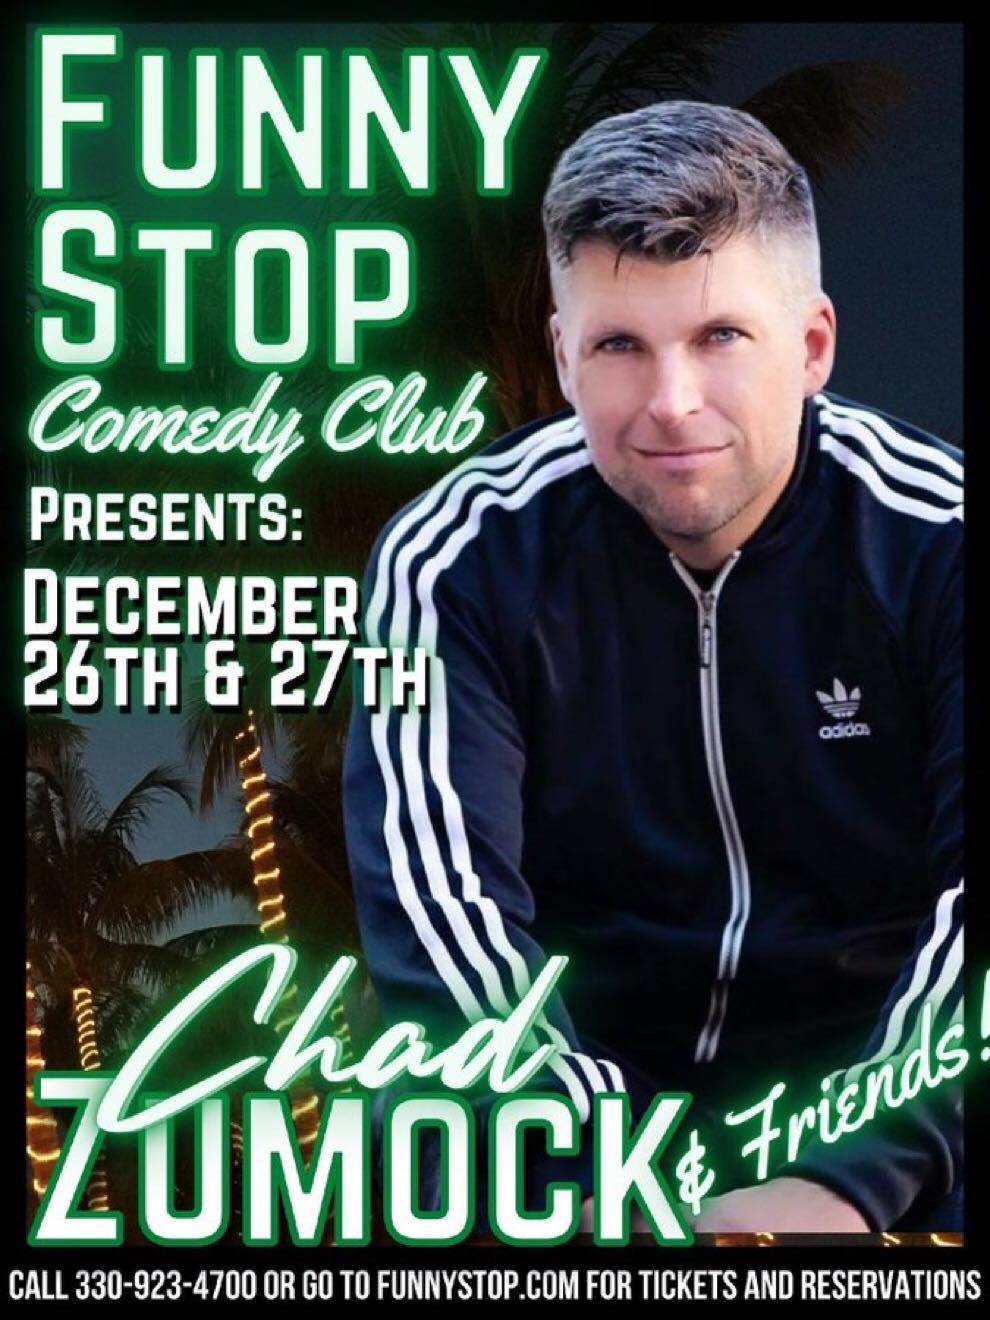 Chad Zumock - Mon. 8PM Show Funny Stop Comedy Club on Dec 26, 20:00@Funny Stop Comedy Club - Buy tickets and Get information on Funny Stop funnystop.online